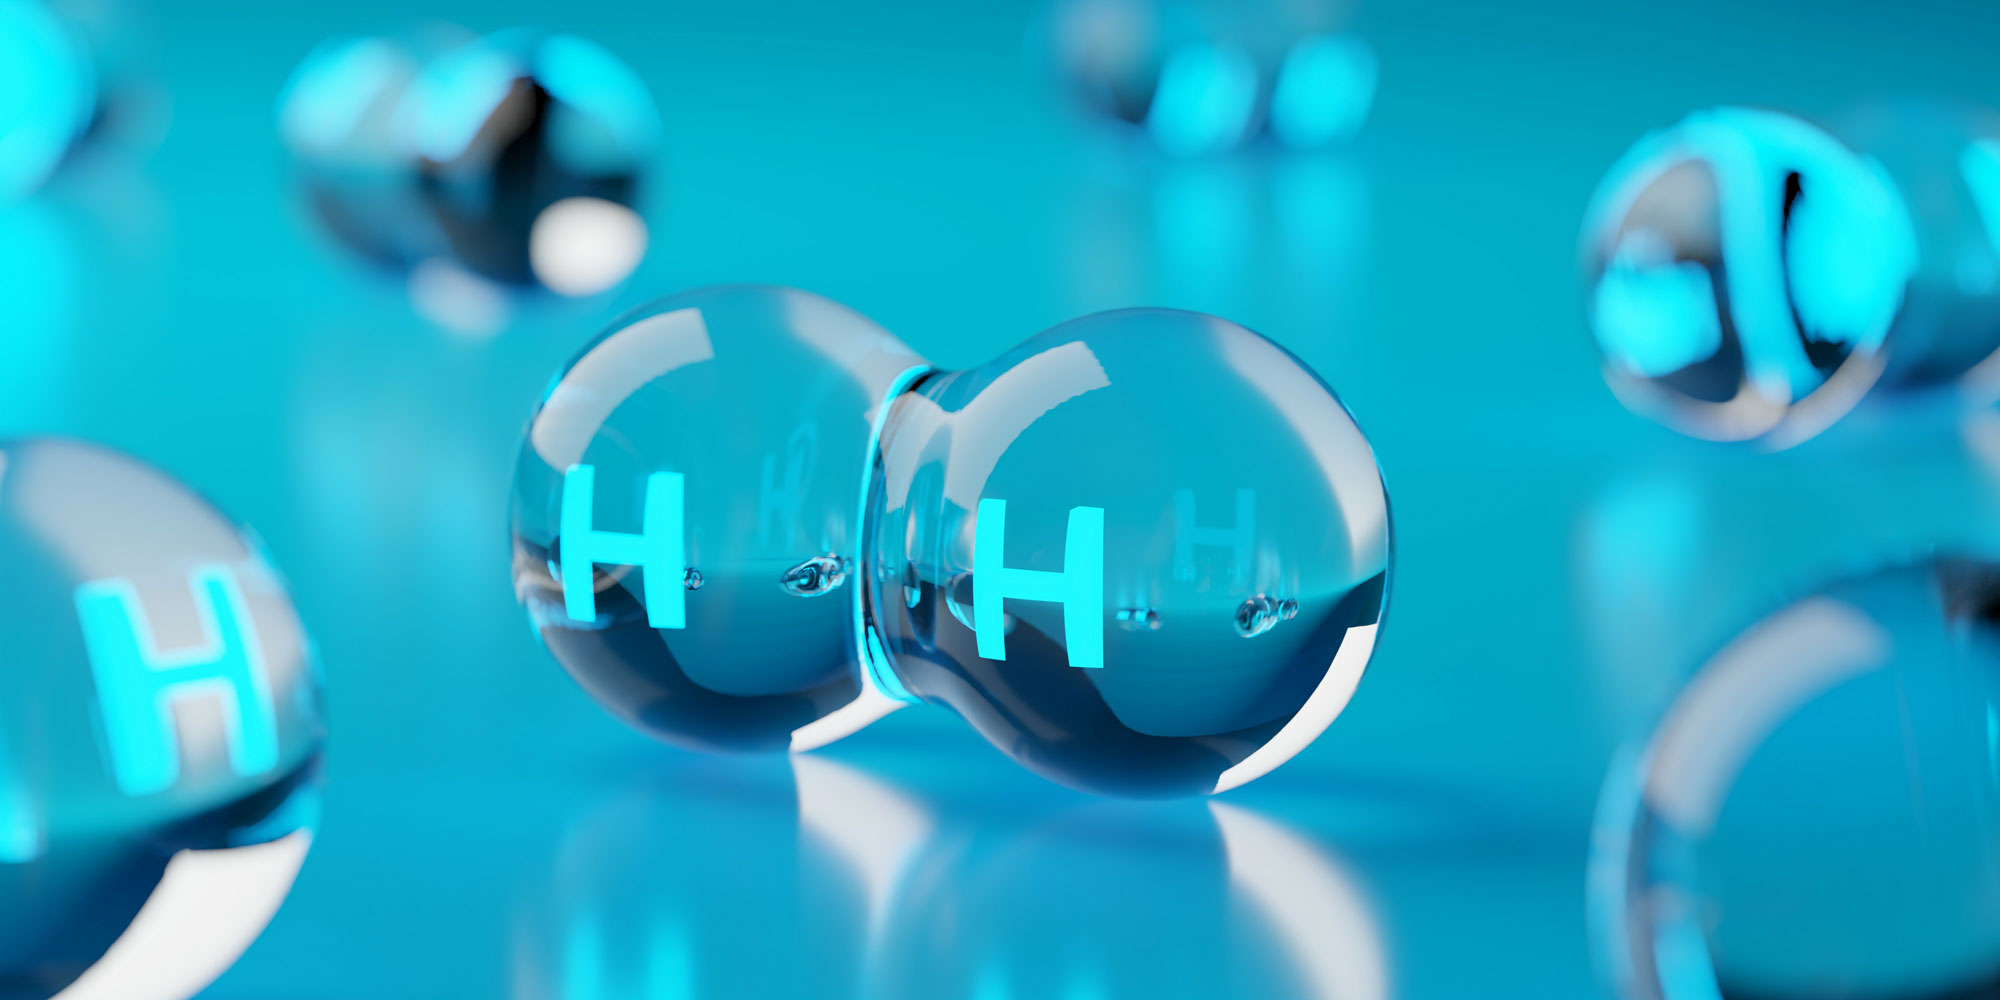 Abstract transparent hydrogen H2 molecules on blue background, clean energy or chemistry concept